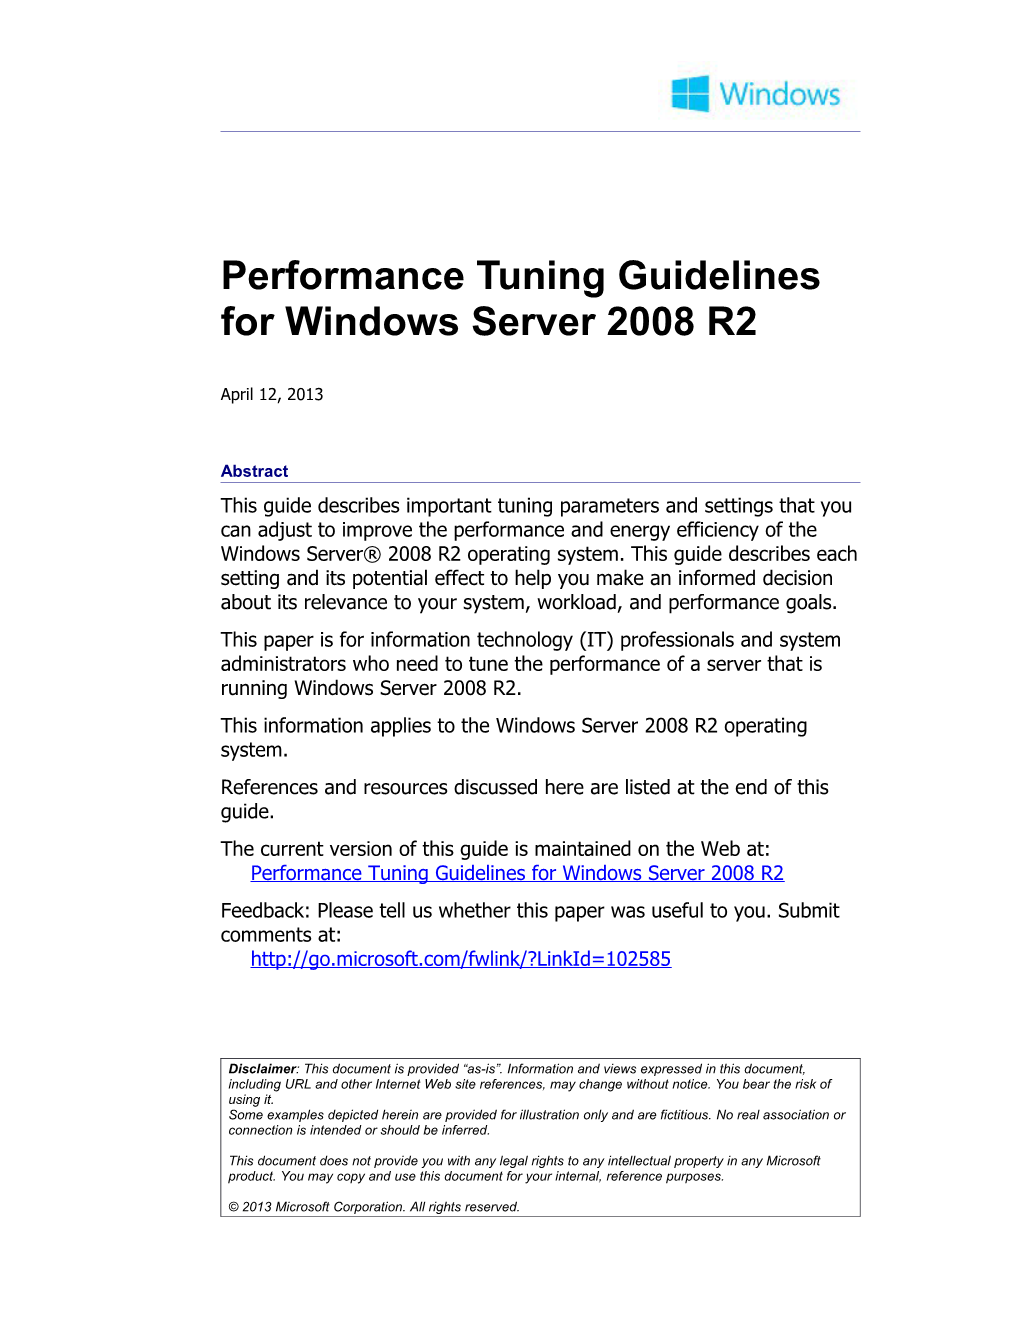 Performance Tuning Guidelines for Windows Server 2008 R2 - 1